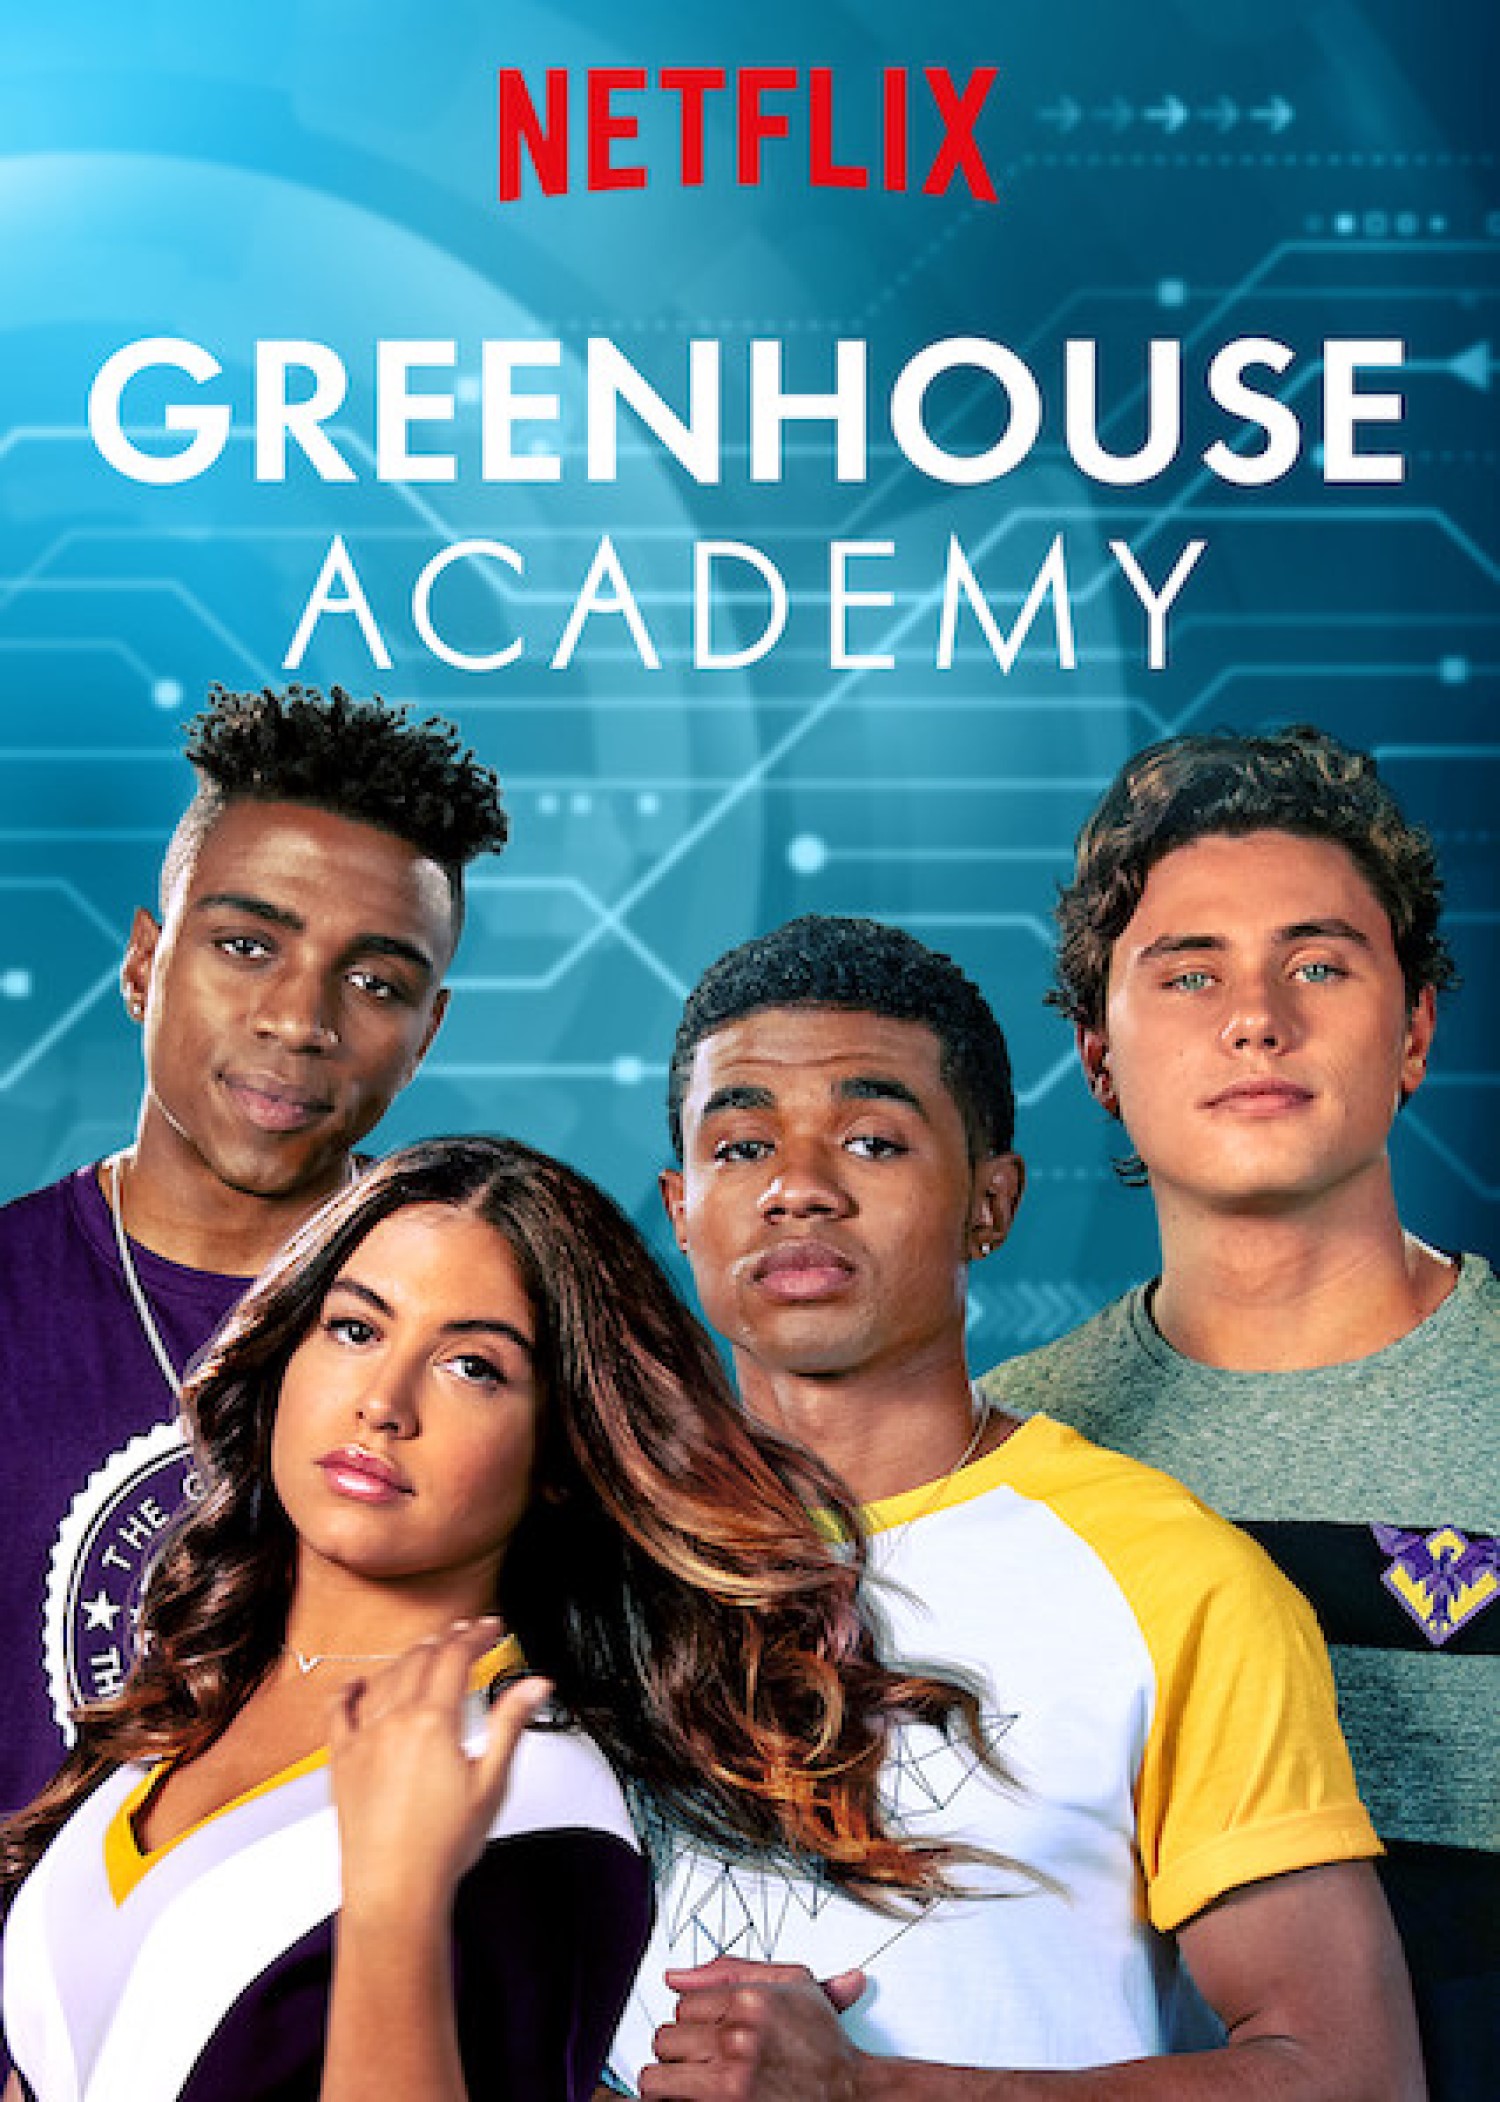 Louis (The Greenhouse), Greenhouse Academy Wiki